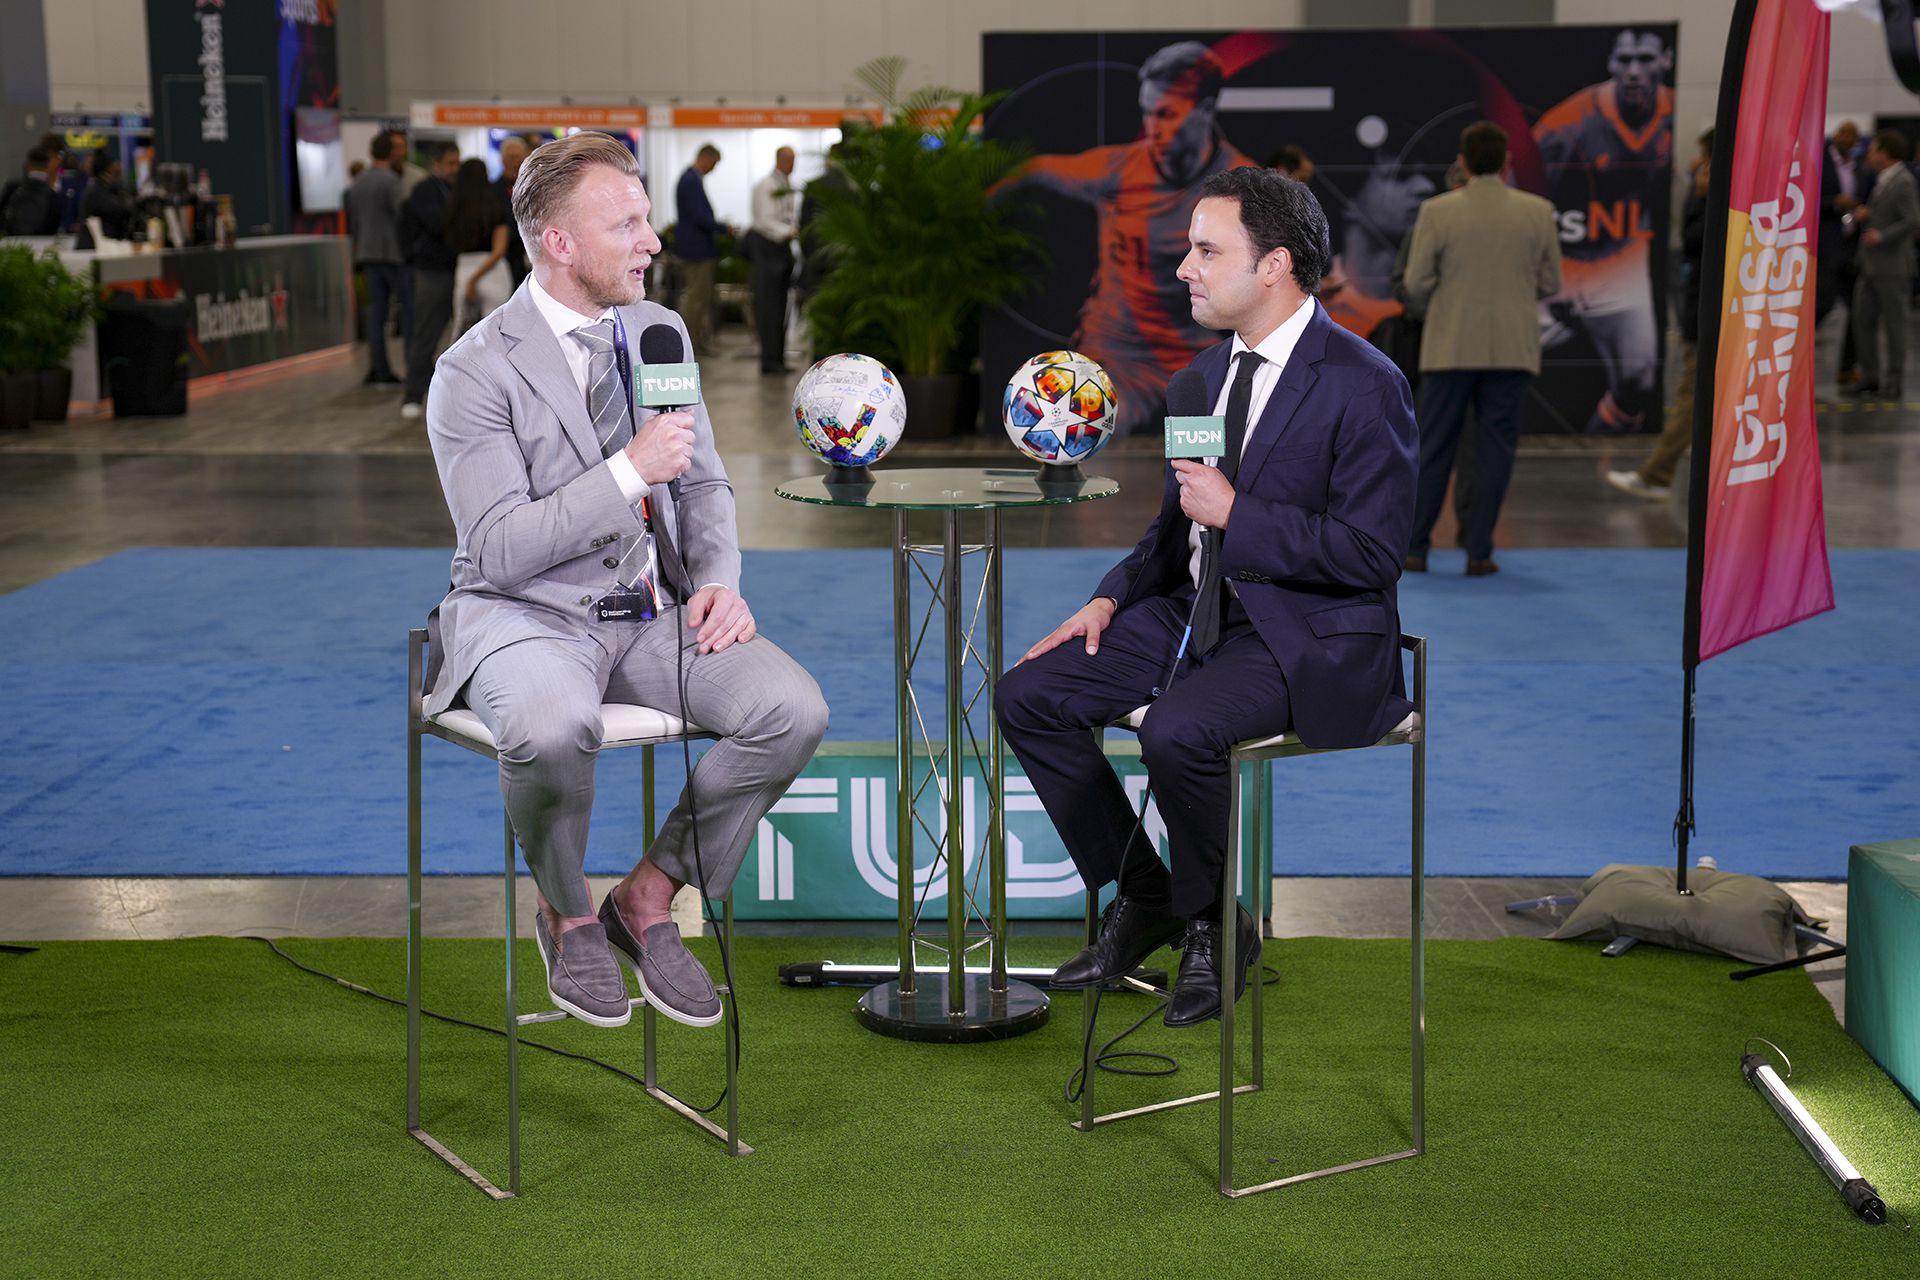 MIAMI, FL - MARCH 15: Dirk Kuyt is interviewed by Alejandro Berry during Day 1 of SoccerEx at the Miami Beach Convention Center on March 15, 2022 in Miami, Florida. (Photo by Eric Espada/Getty Images for Soccerex)